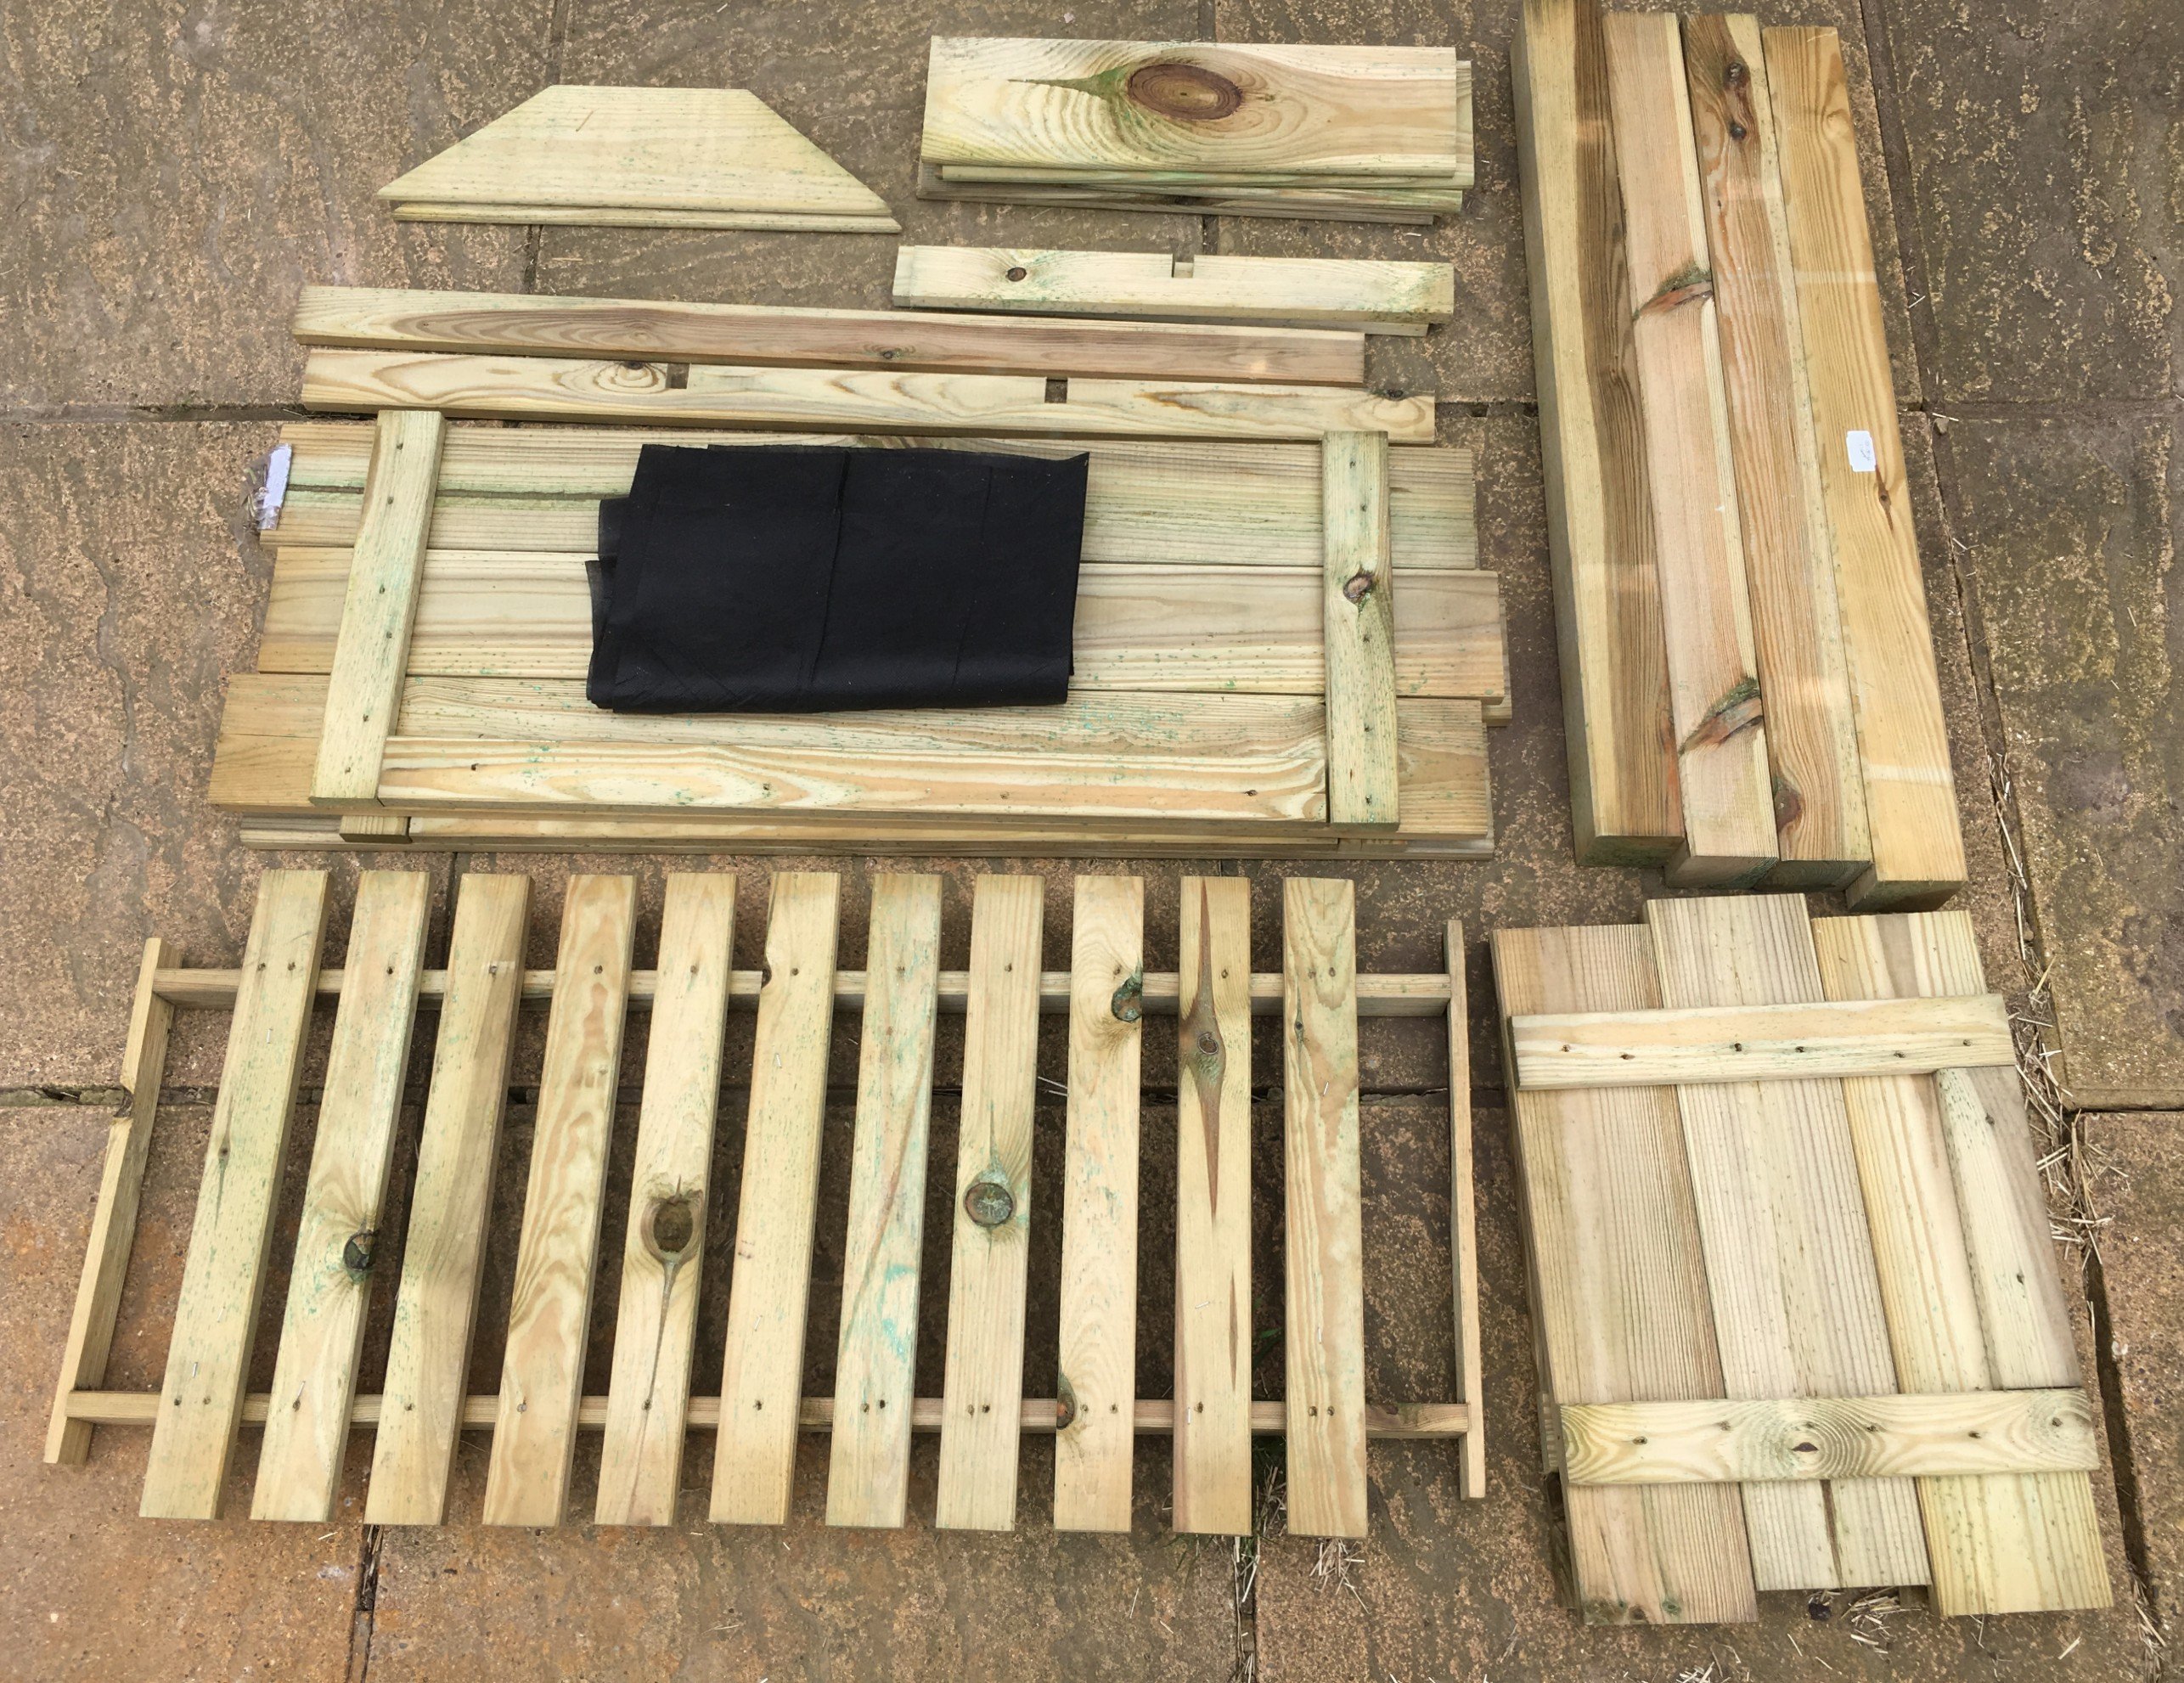 An image of all the parts of the planter pre- assembly